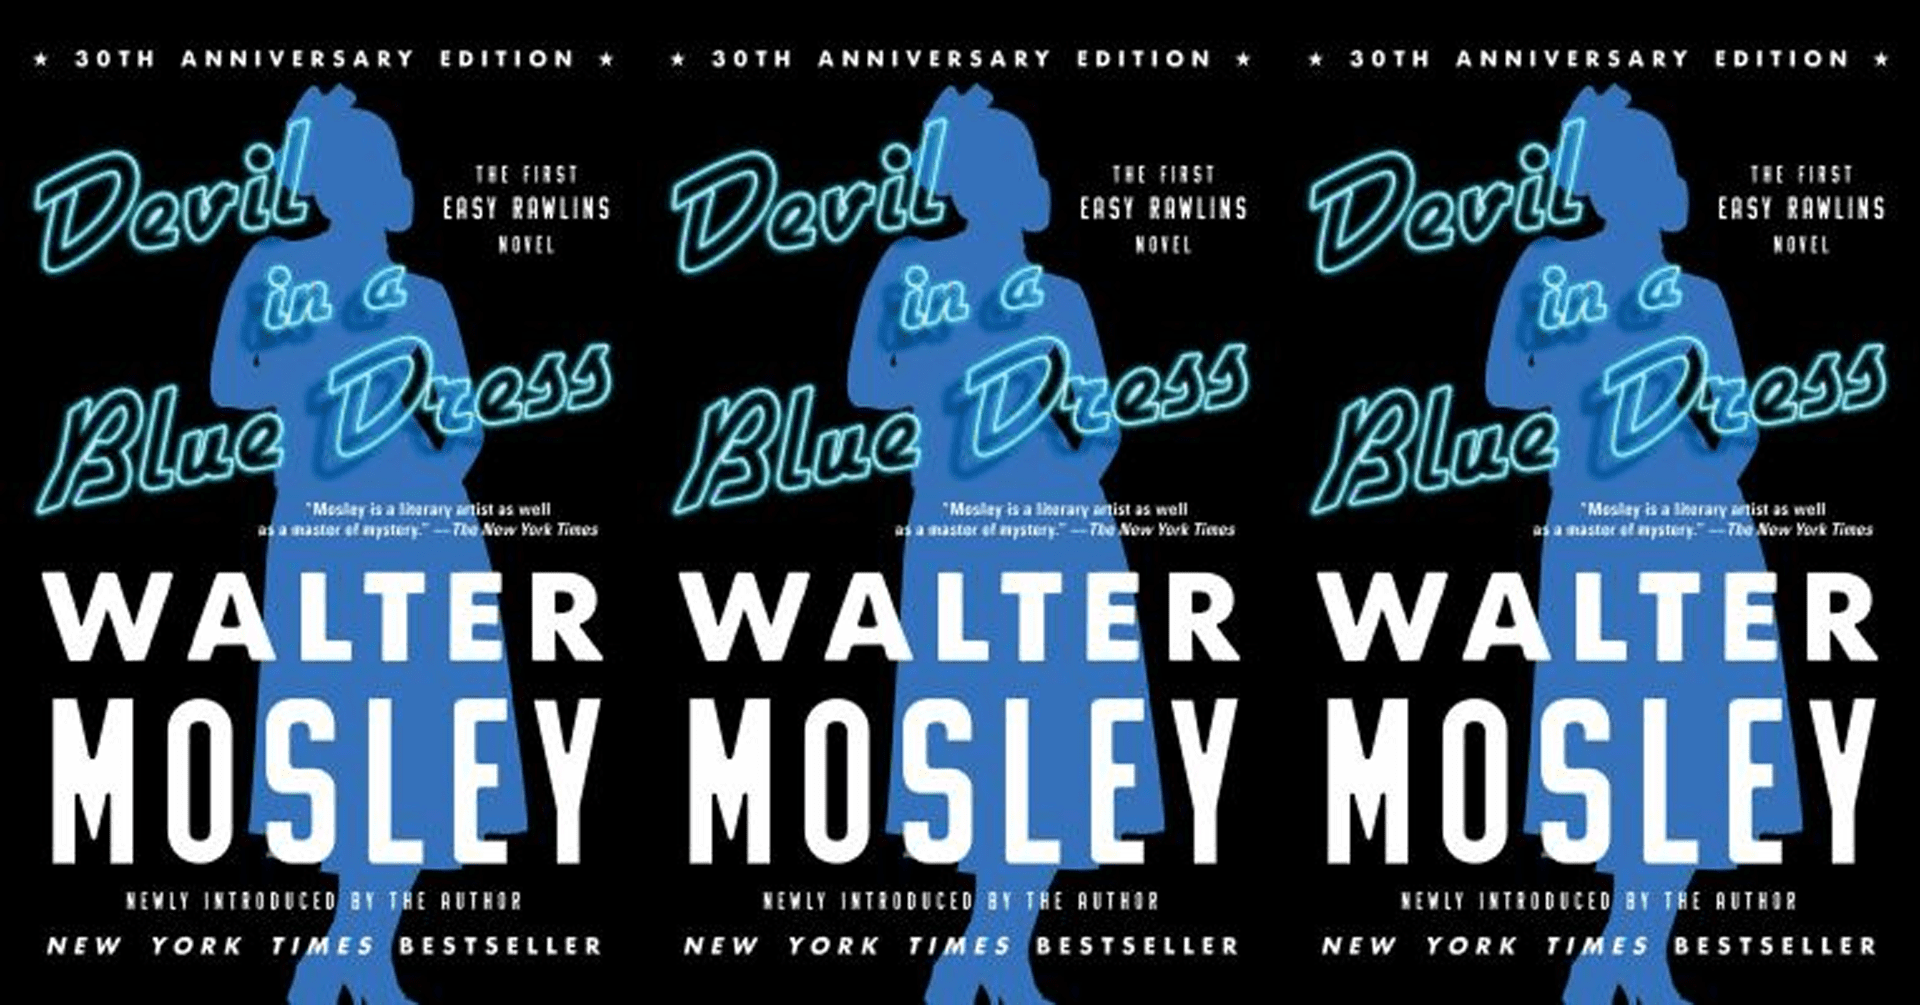 Devil in a Blue Dress by Walter Mosley (book cover)